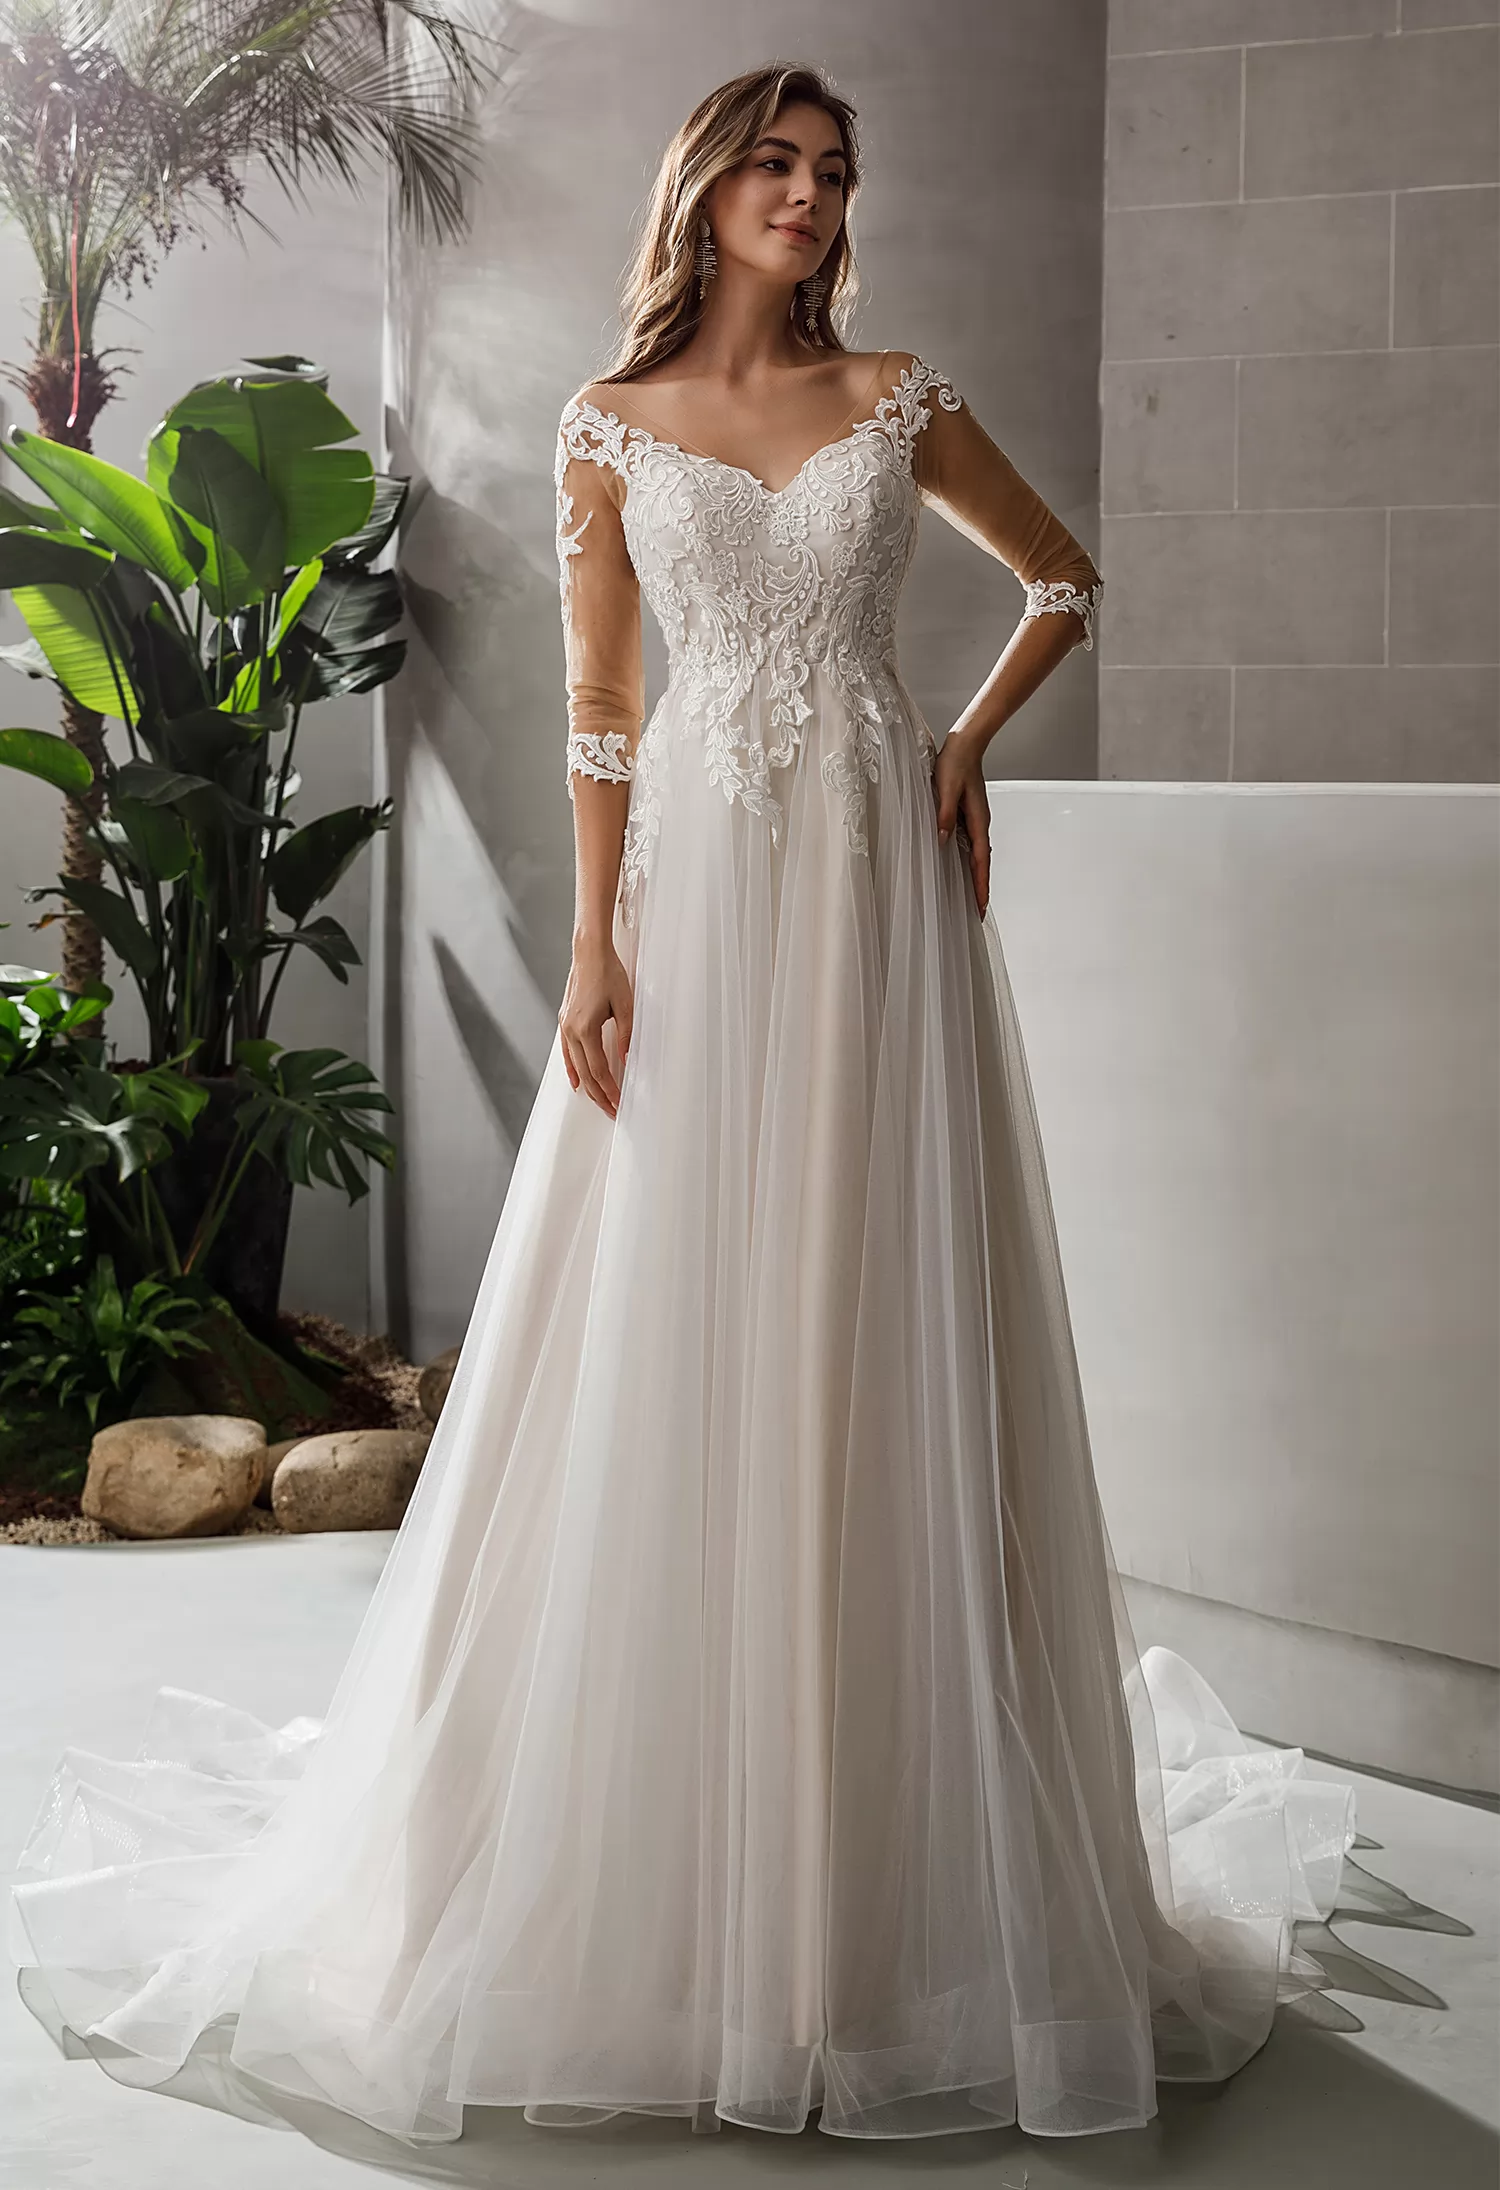 A-line Long Sleeves Illusion Neckline Bridal Wedding Dresses with Lace –  Angrila